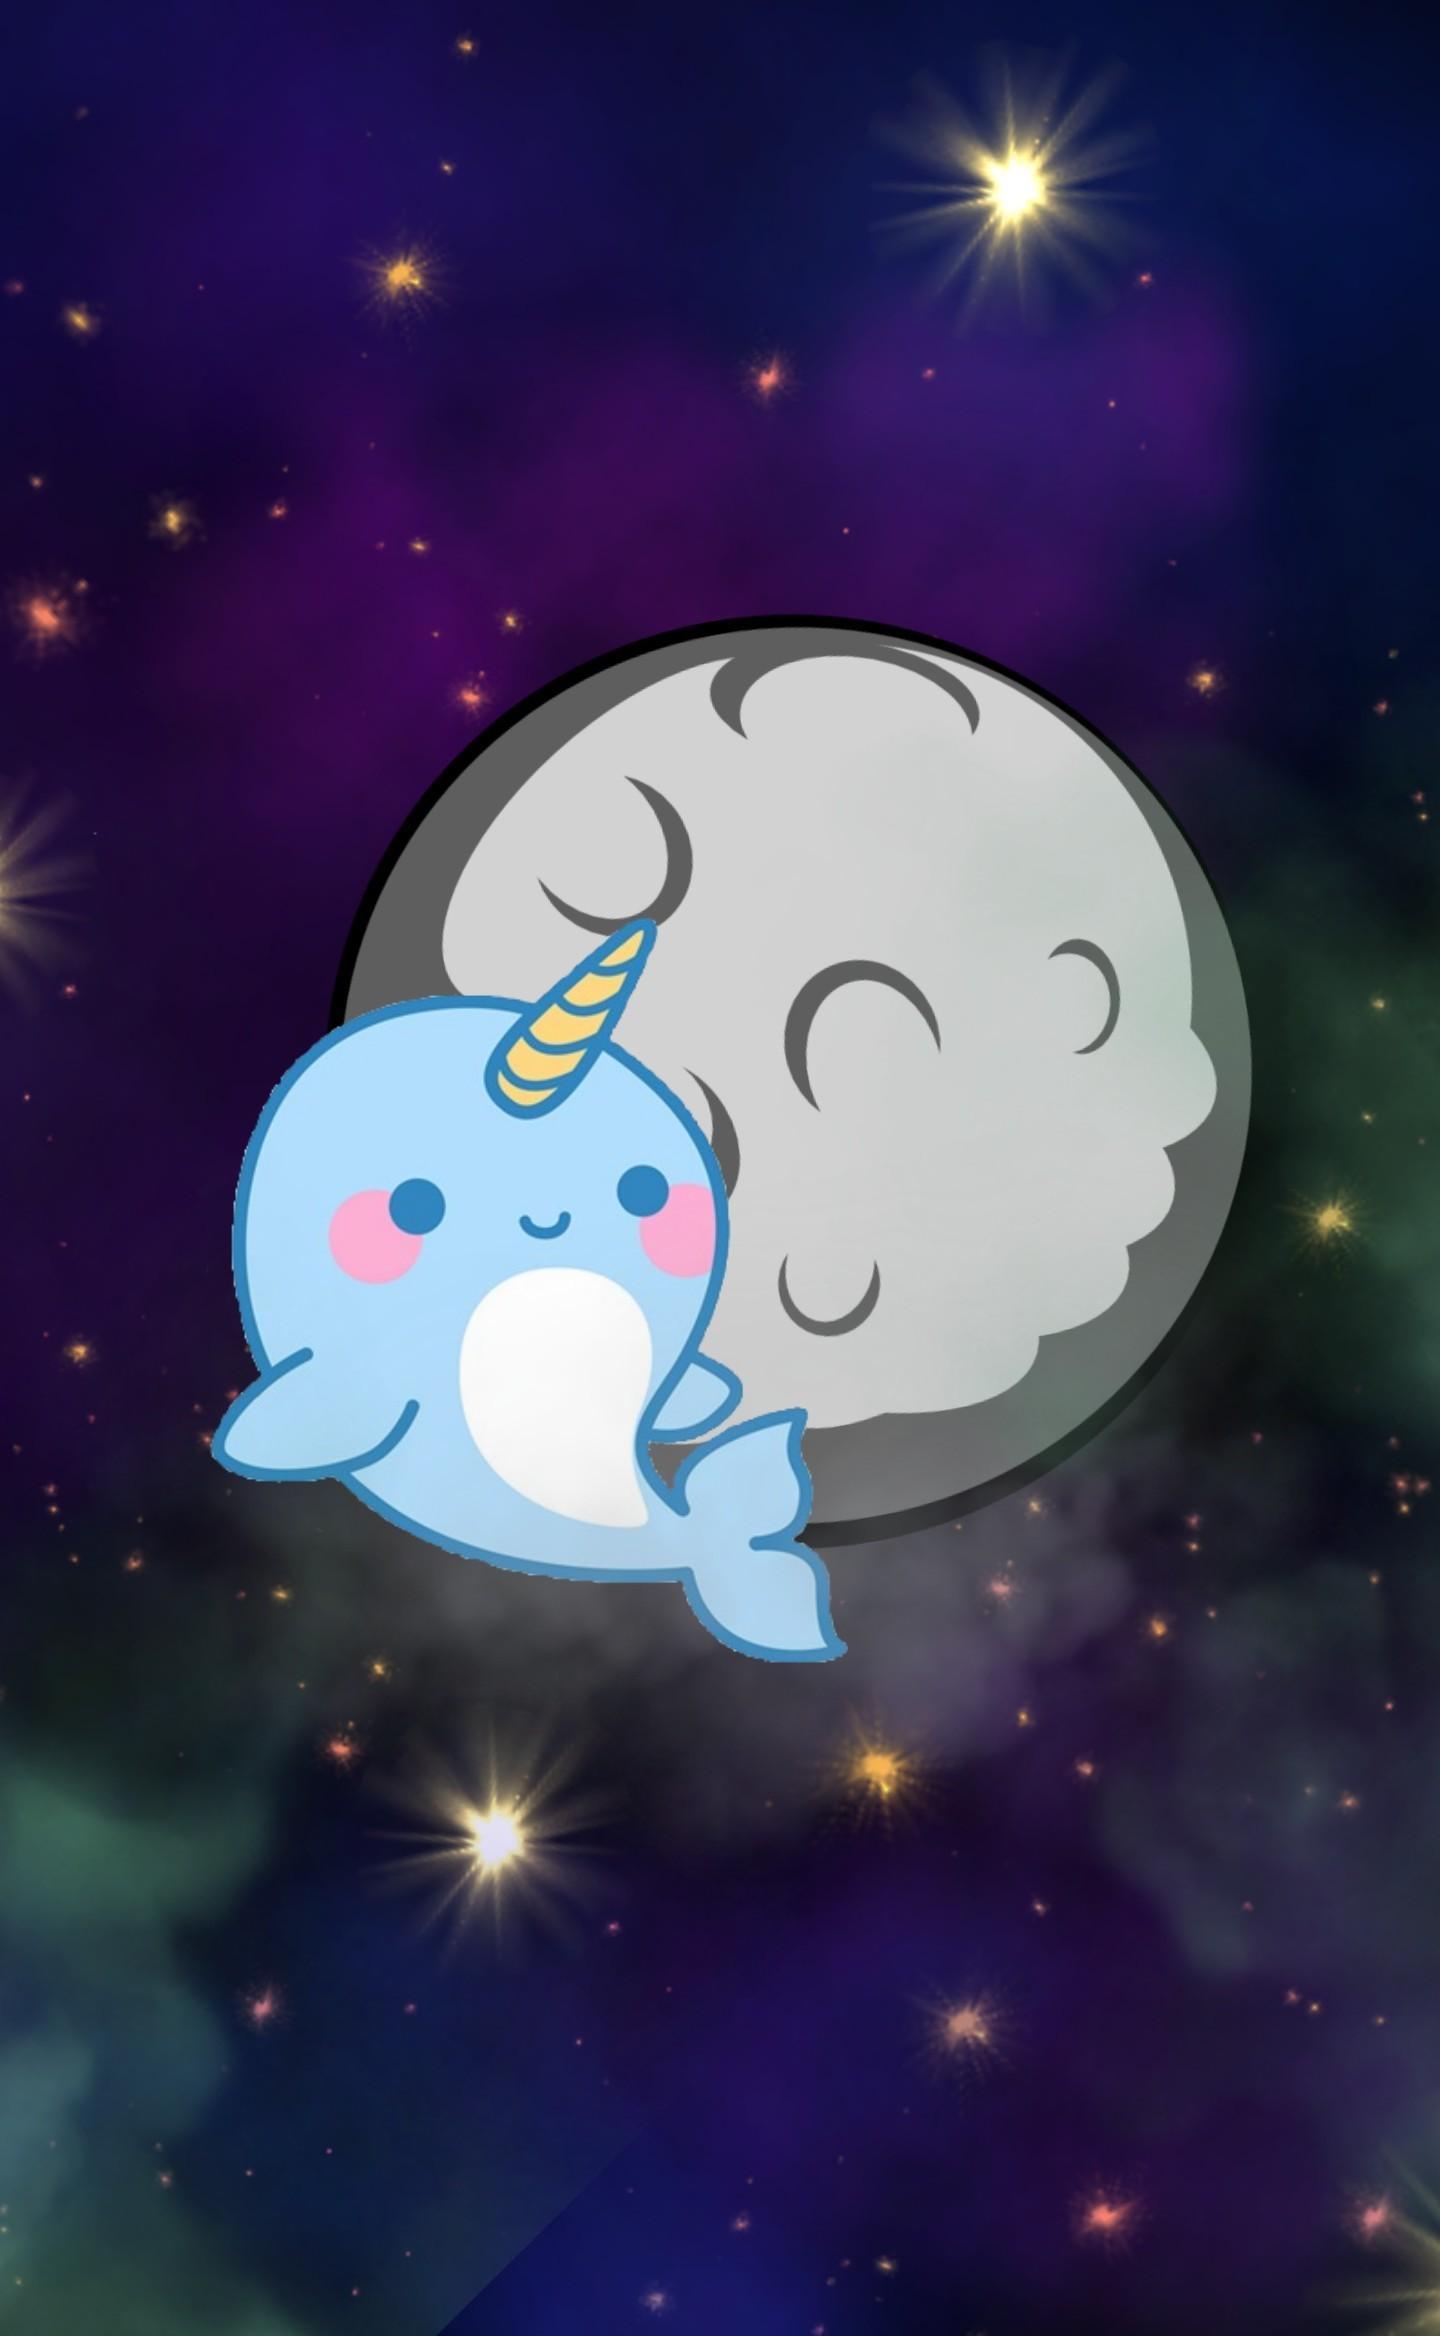 OMIGOD I MADE A SPACE NARWHAL